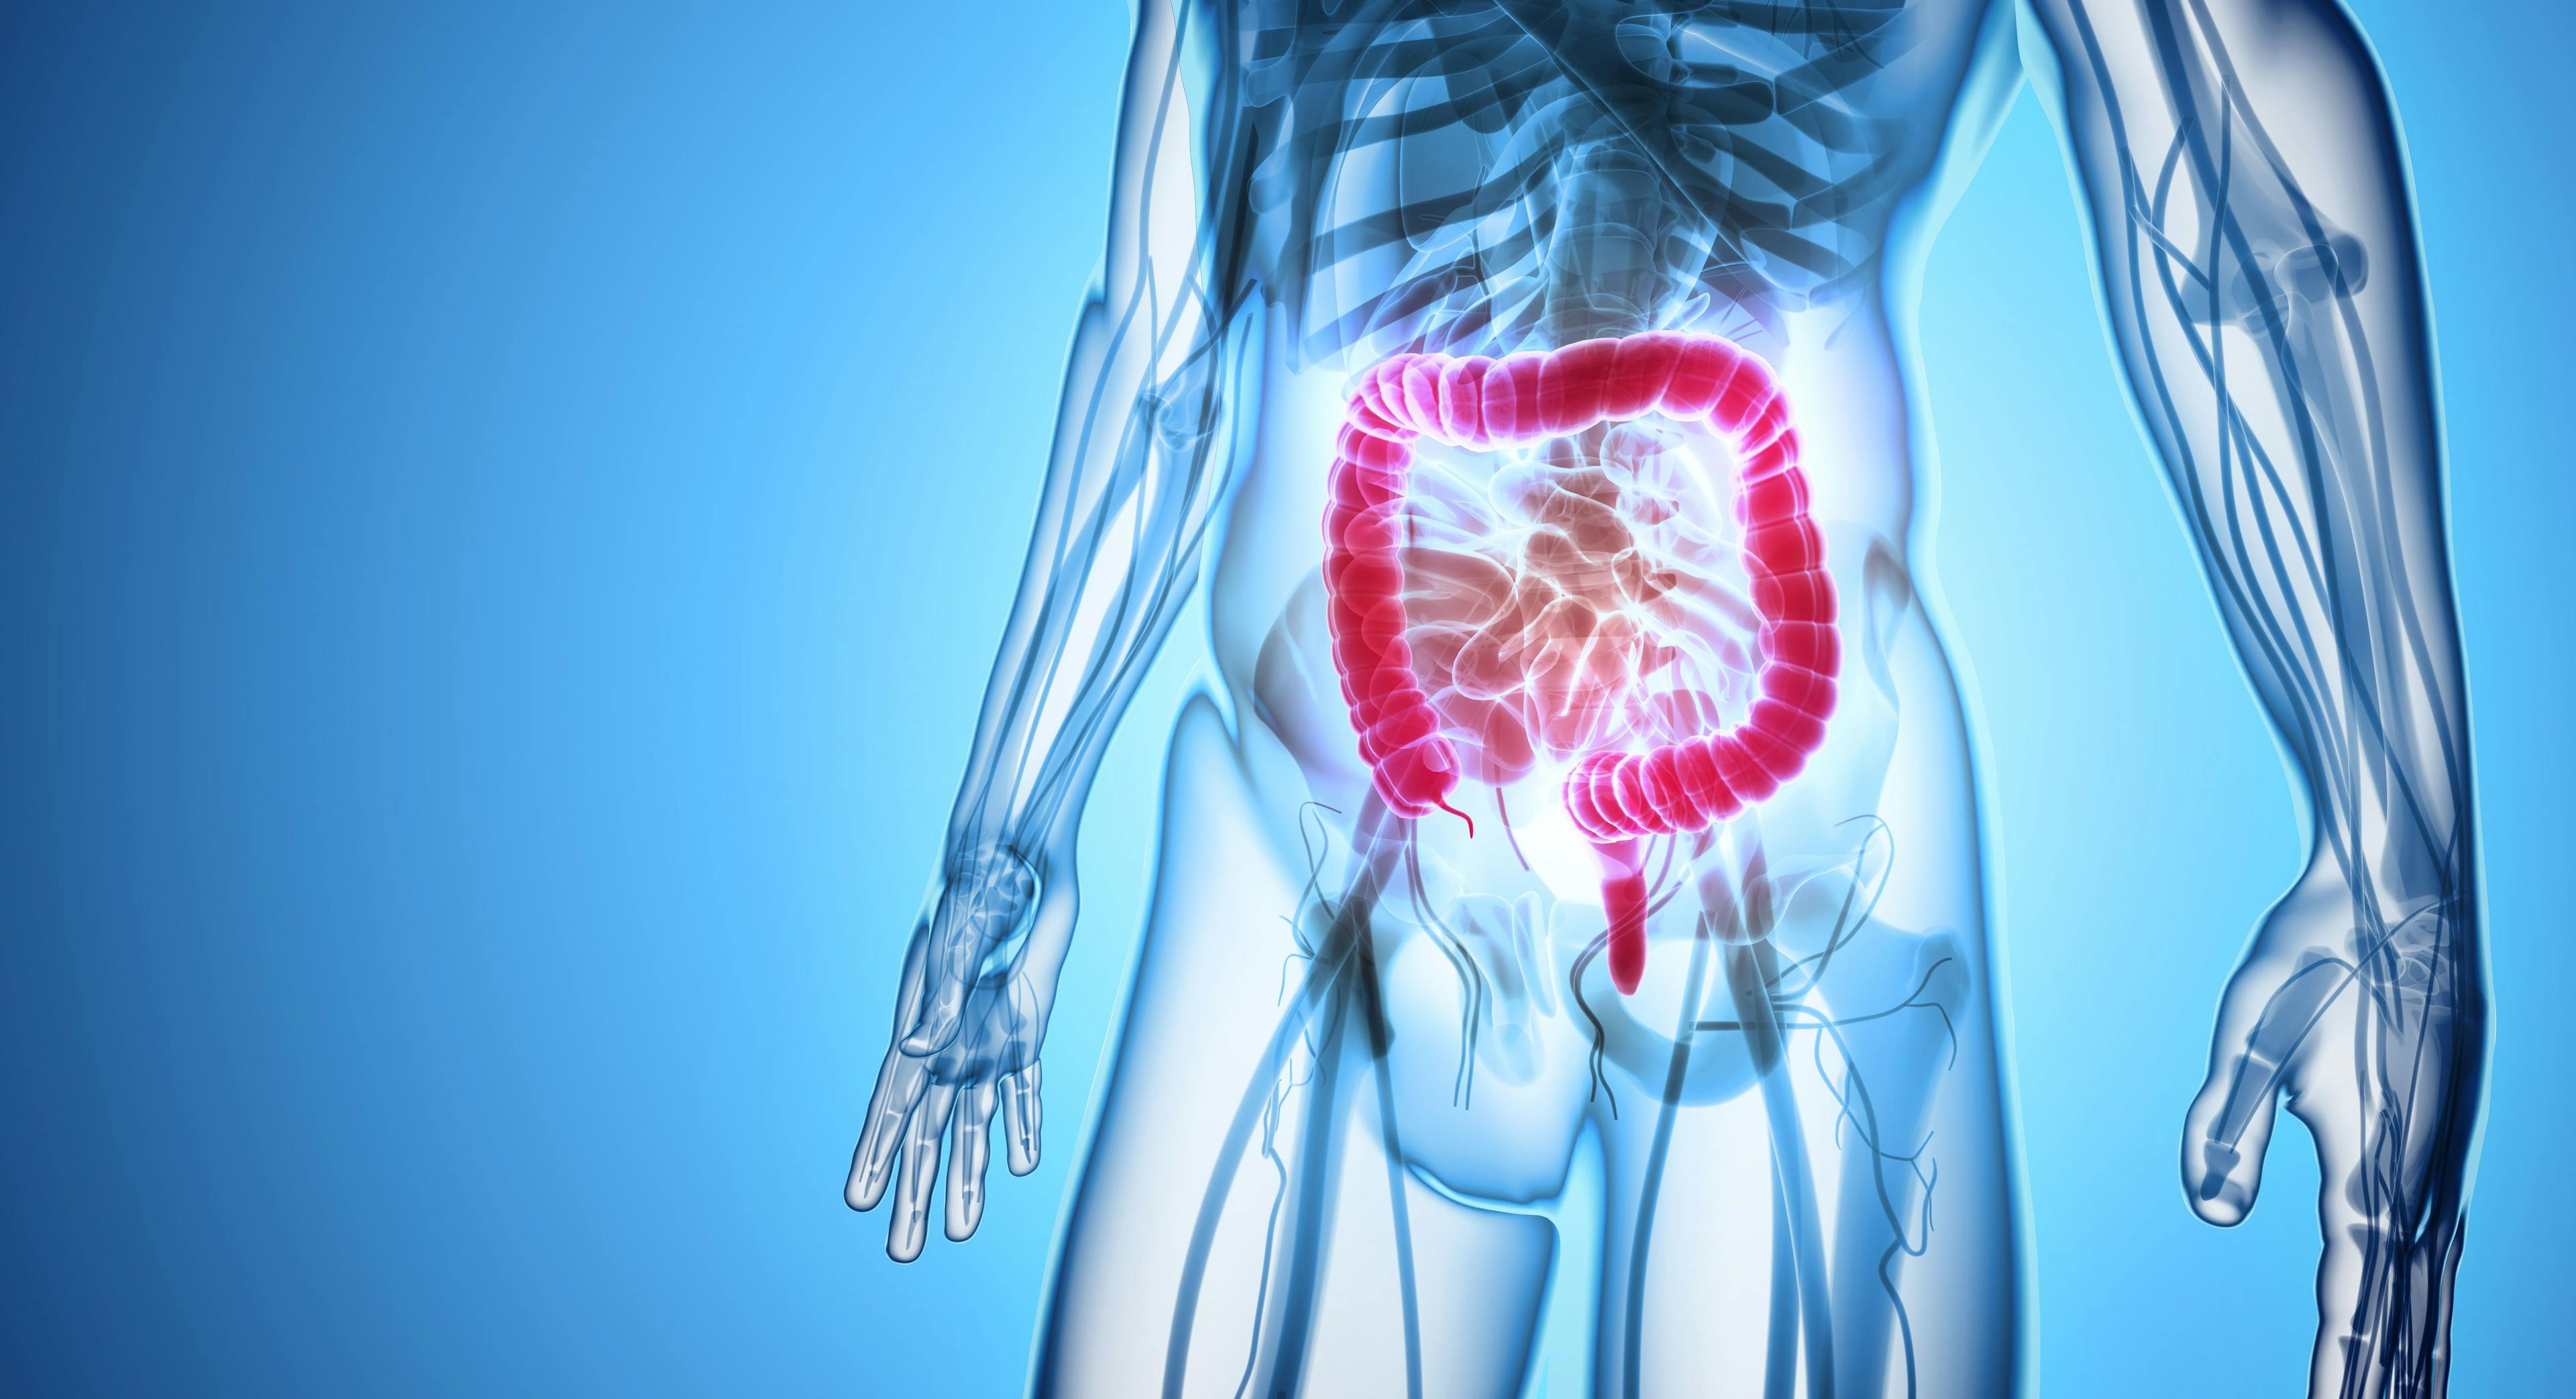 Results from a phase 1/2 study showed that a combination of encorafenib, cetuximab, and nivolumab was well tolerated and yielded promising responses in patients with microsatellite stable BRAFV600E metastatic colorectal cancer.